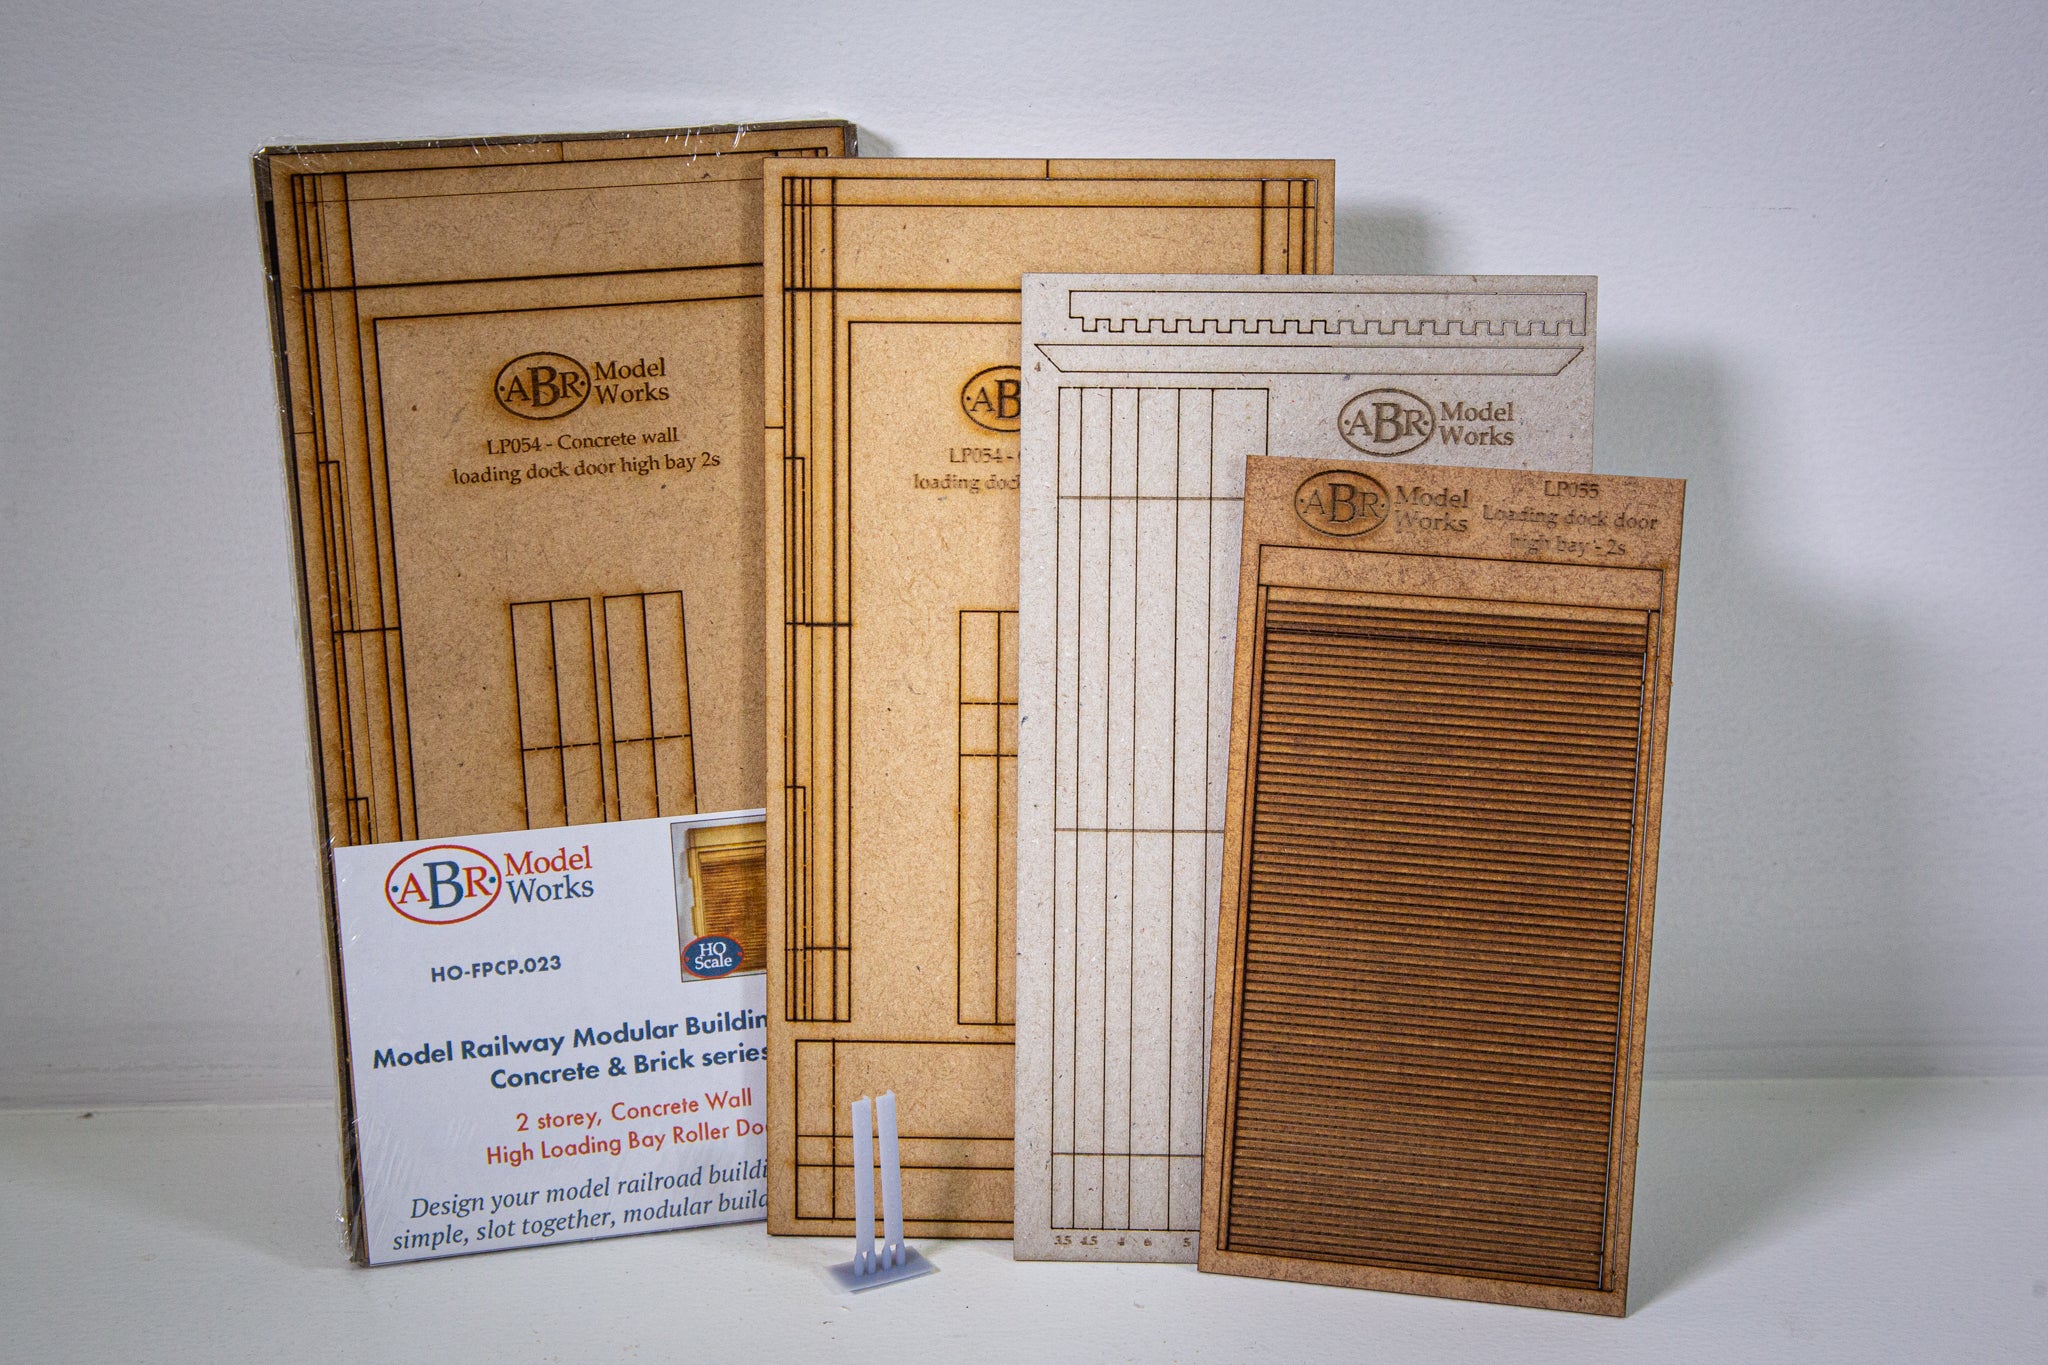 HO Scale - 2 storey, Concrete Wall High Loading Bay Roller Door